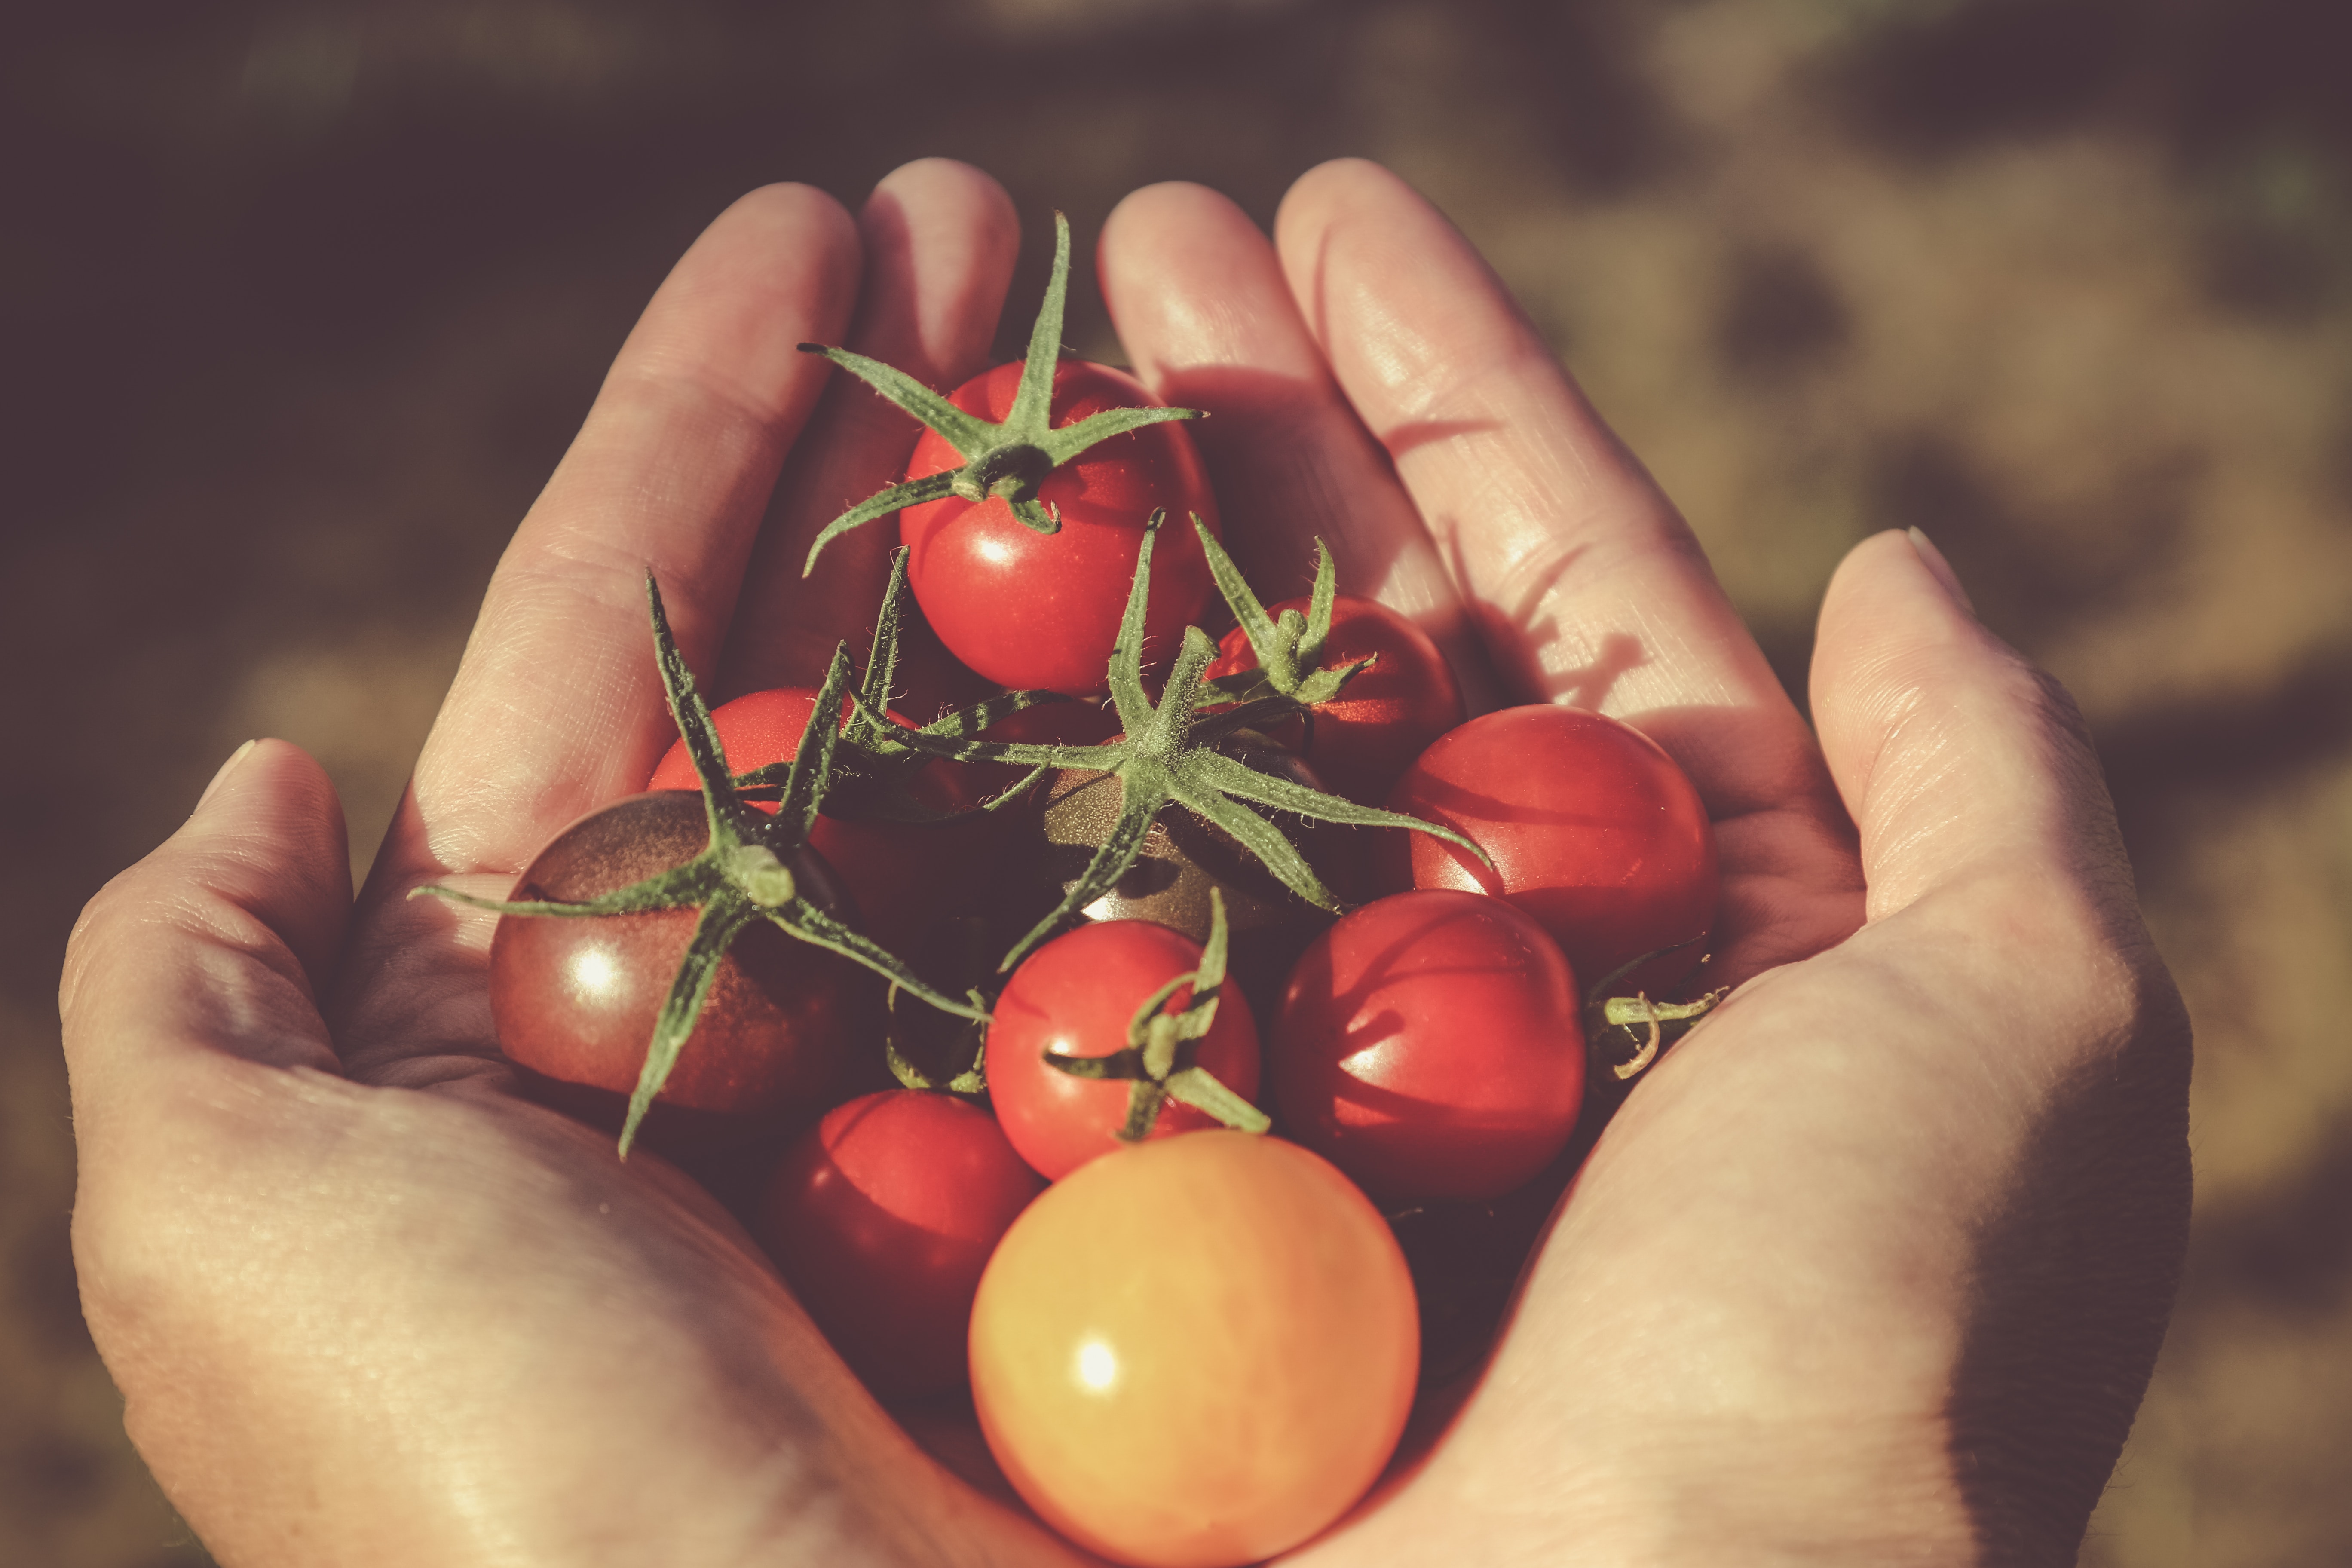 Sustainable Giving: Where to Donate Your Excess Food & Produce in Middle Tennessee